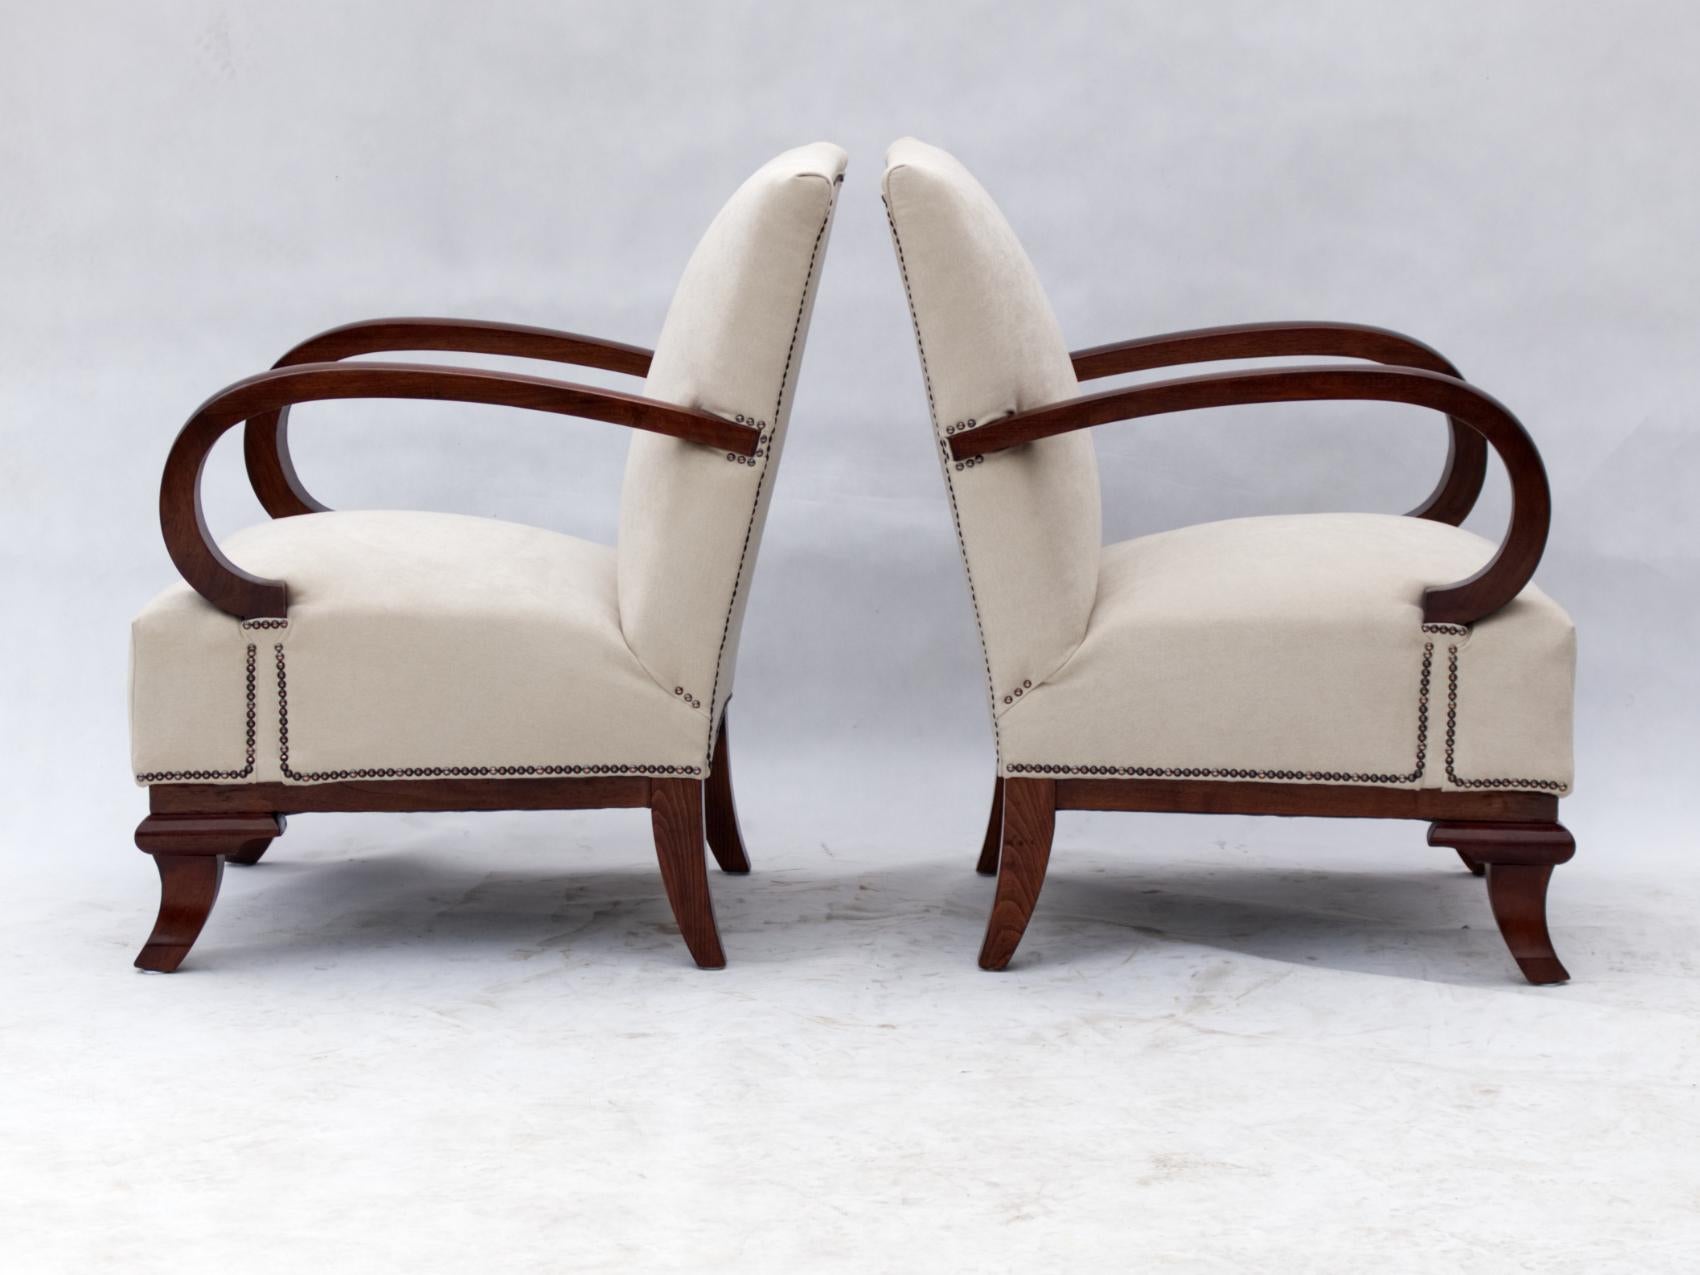 Early 20th Century Pair of Art Deco Armchairs, Fully Restored Attributed to Lajos Kozma, 1922